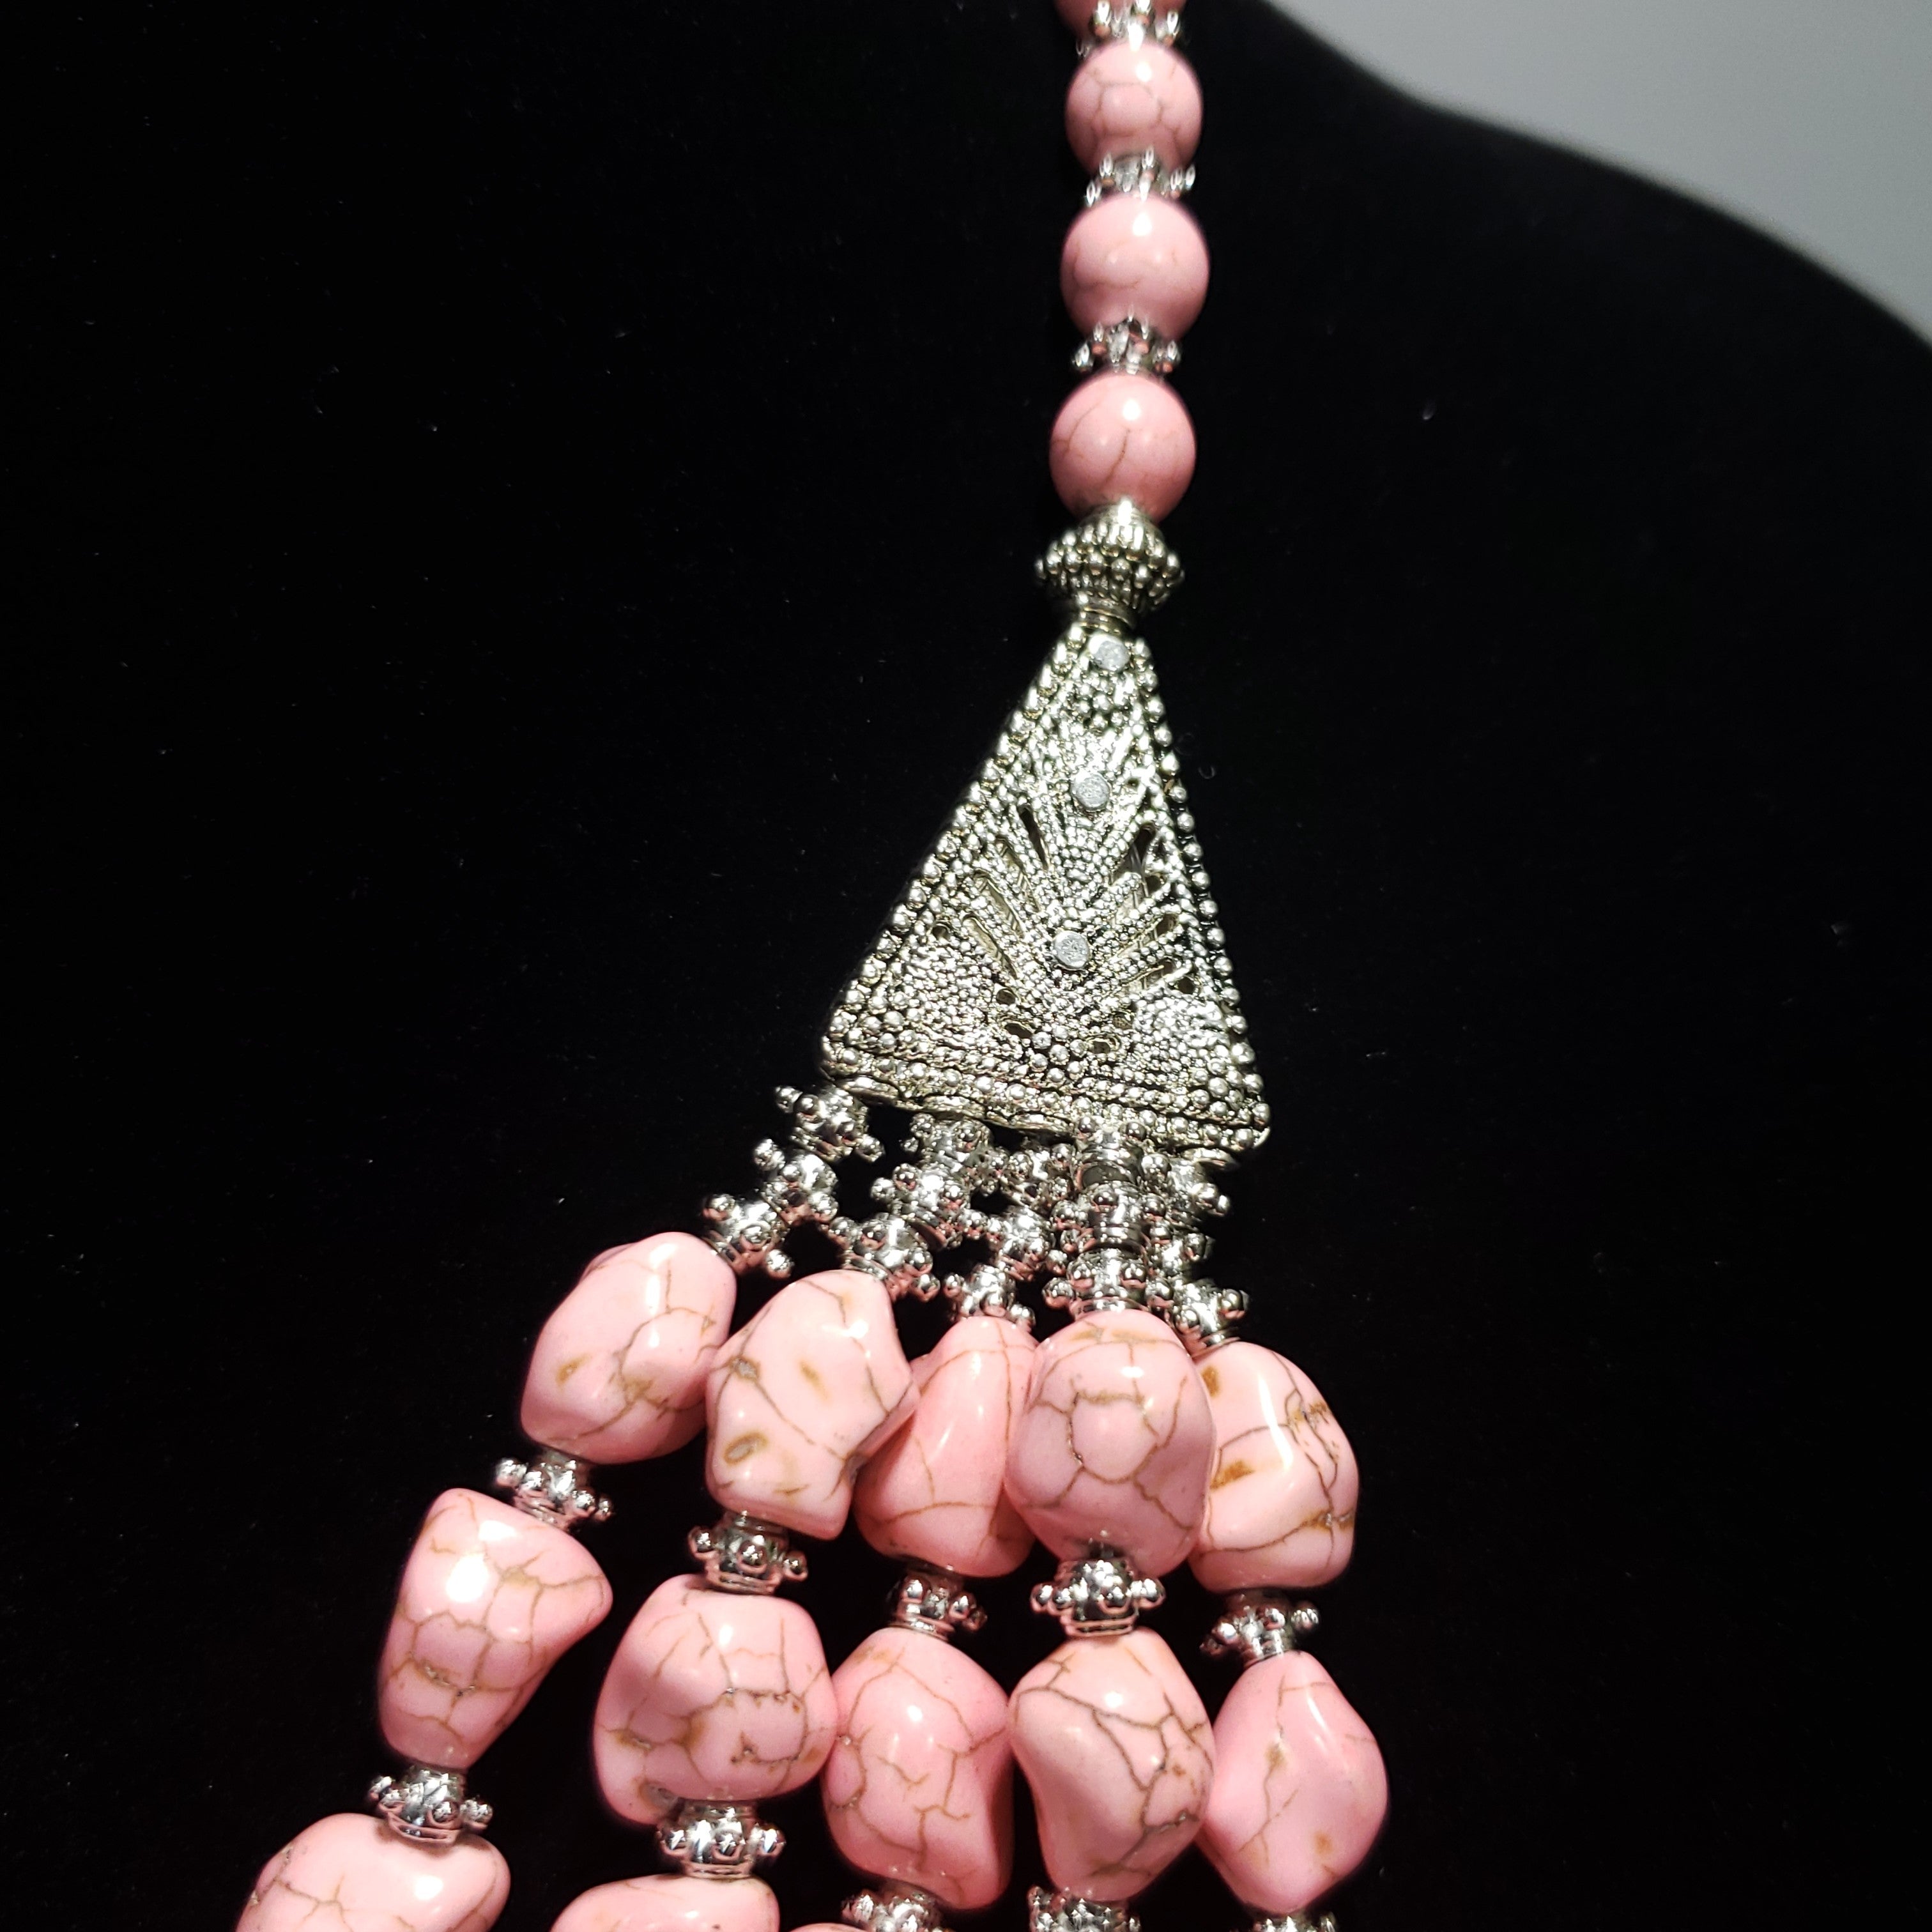 Pink Howlite Triple Row Drape Necklace in Silvertone (20.00 In) TGW 1004.00 cts. - Houzz of DVA Boutique